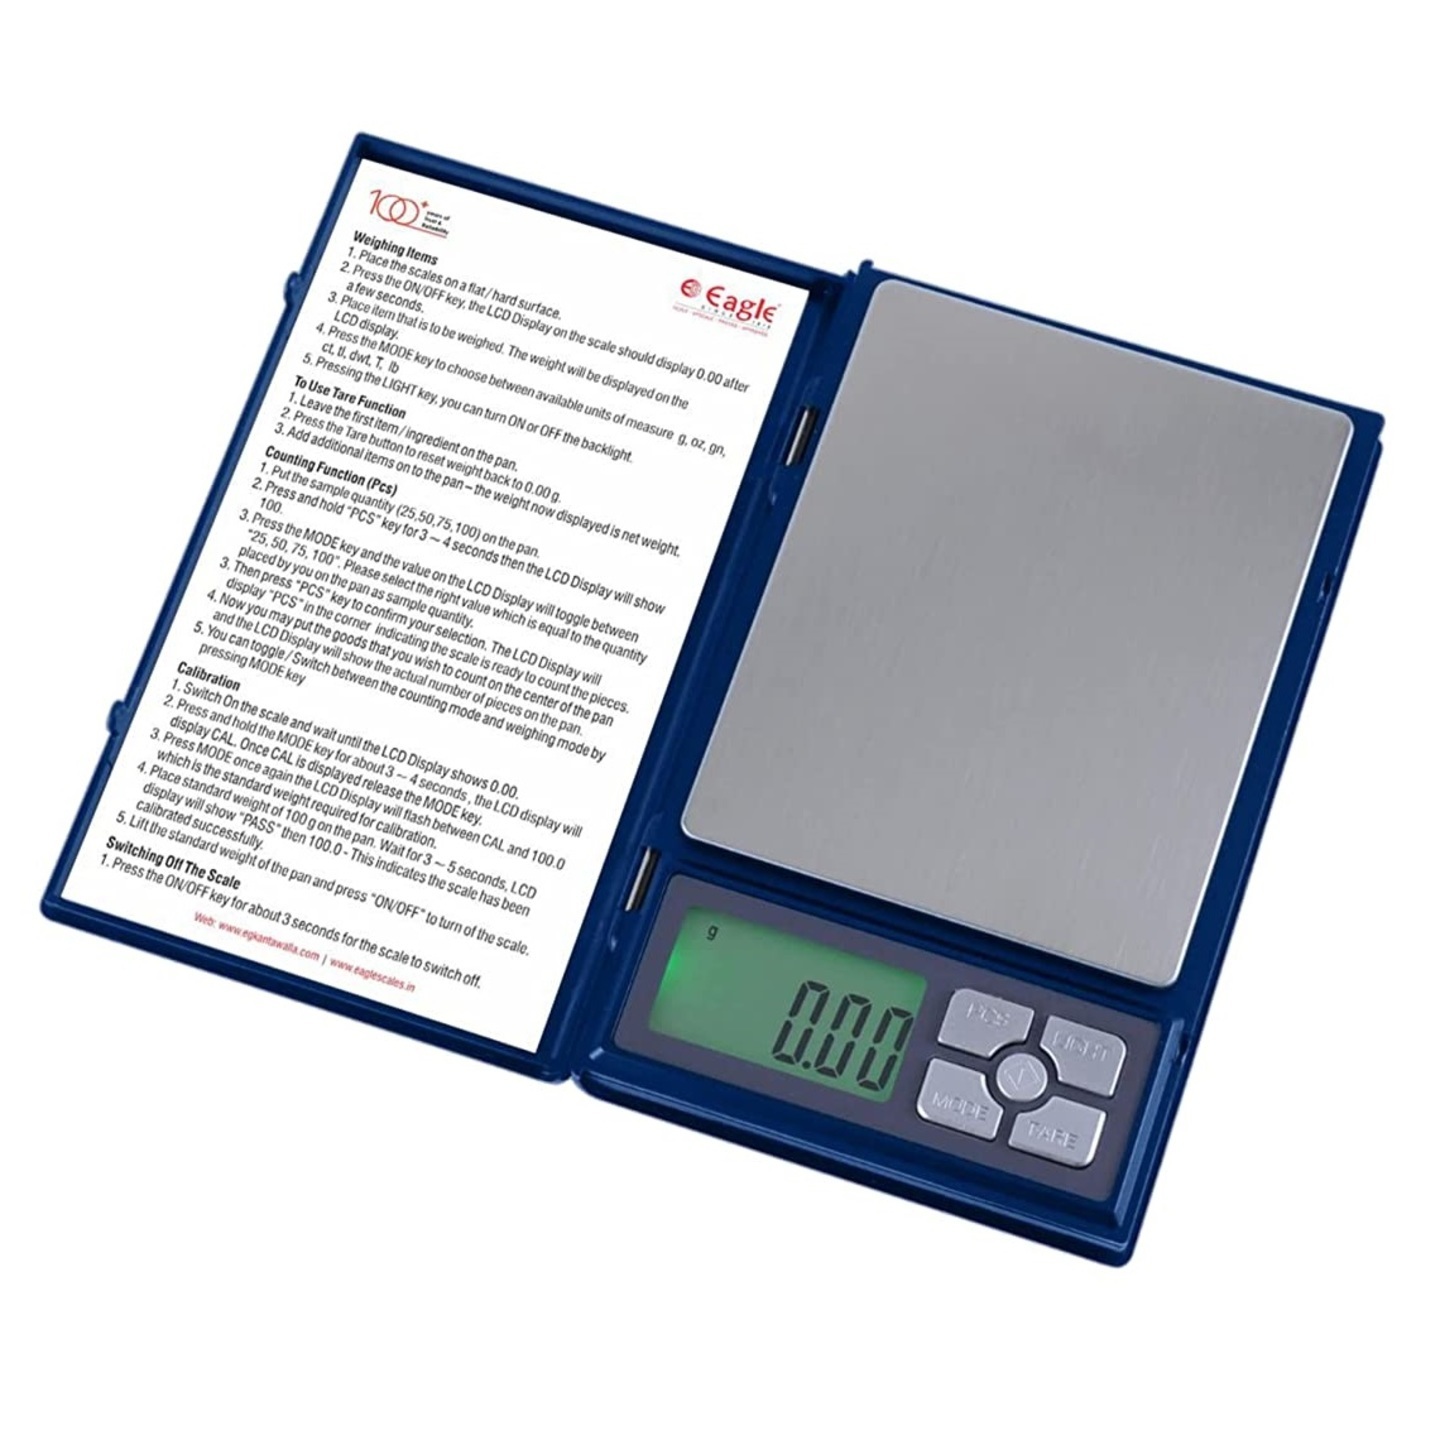 Eagle Digital Pocket Scale with 600 g Capacity and 0.01g Accuracy